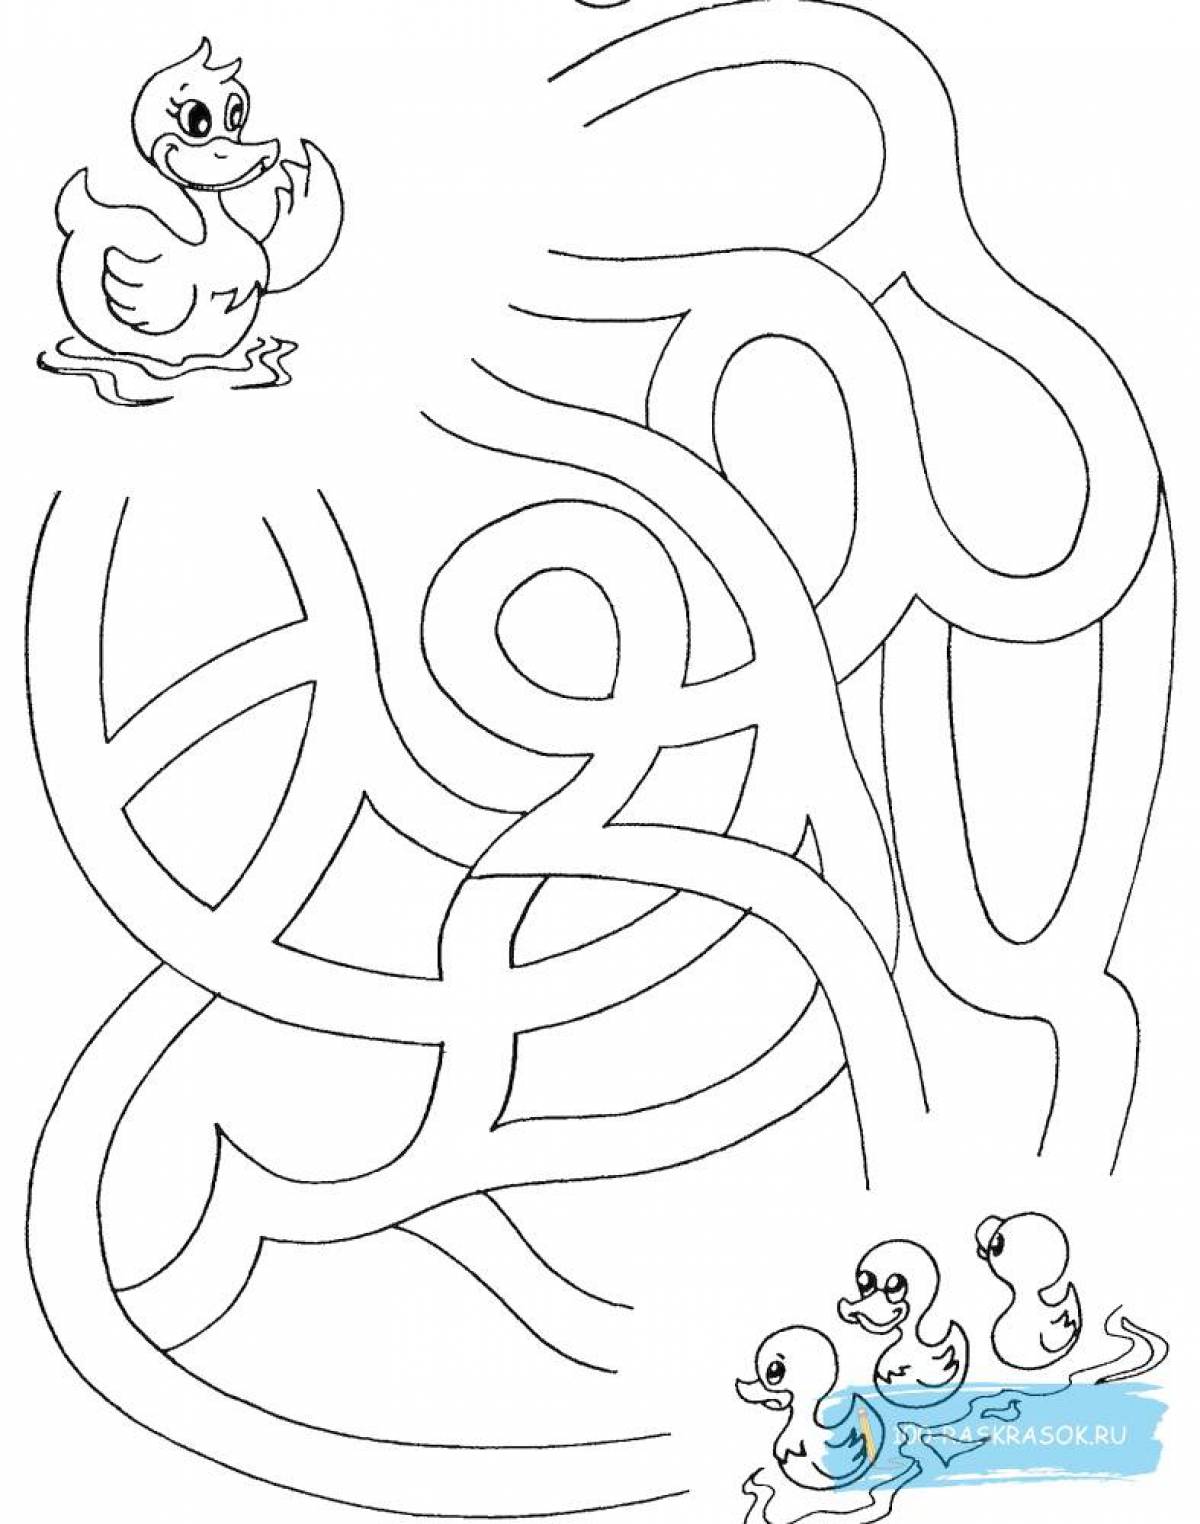 Harmonious labyrinth coloring page